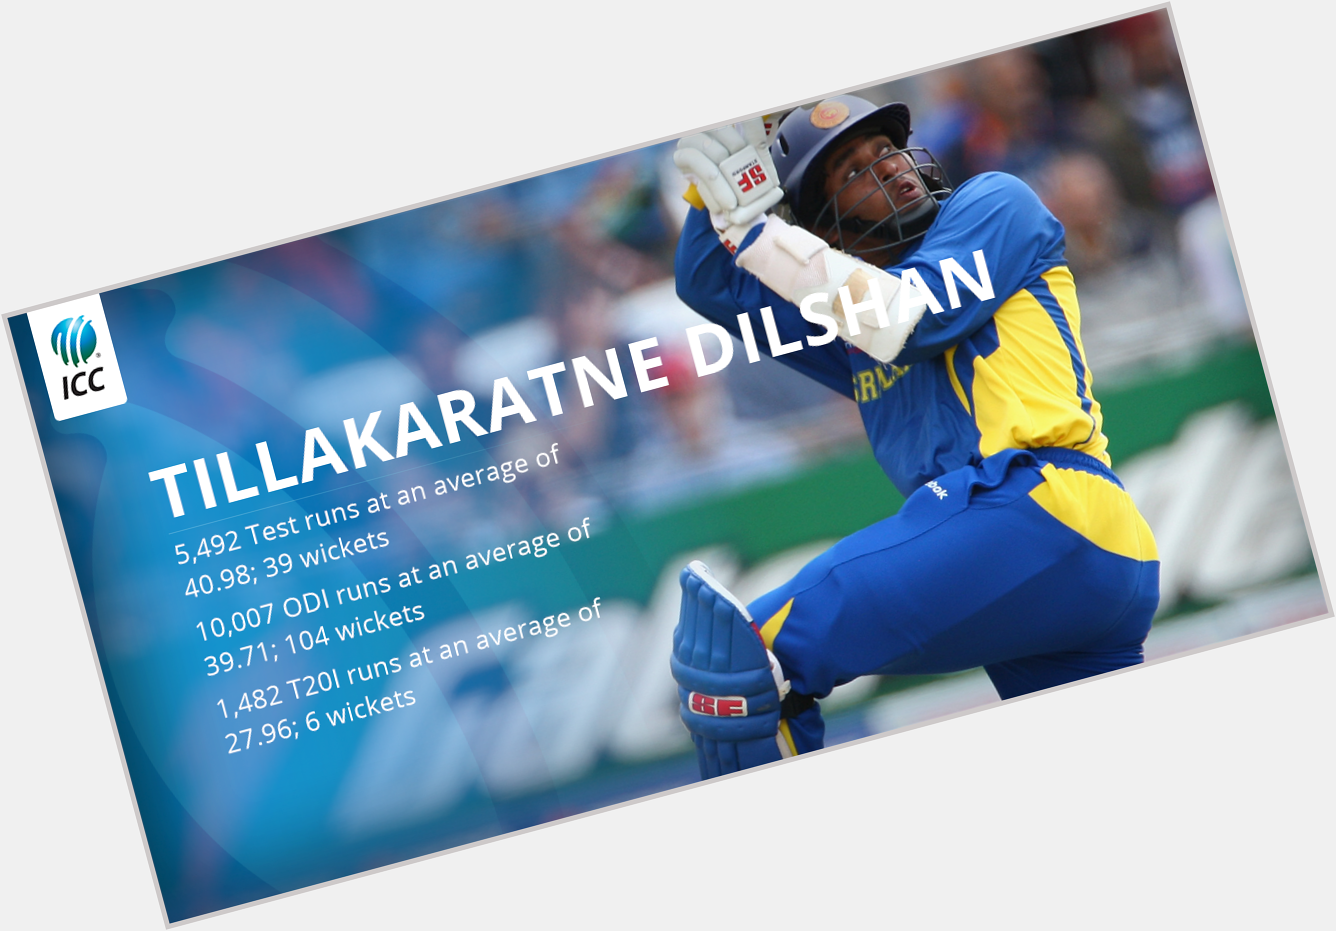 Happy Birthday to the inventor of the Dil-scoop, Tillakaratne Dilshan!  